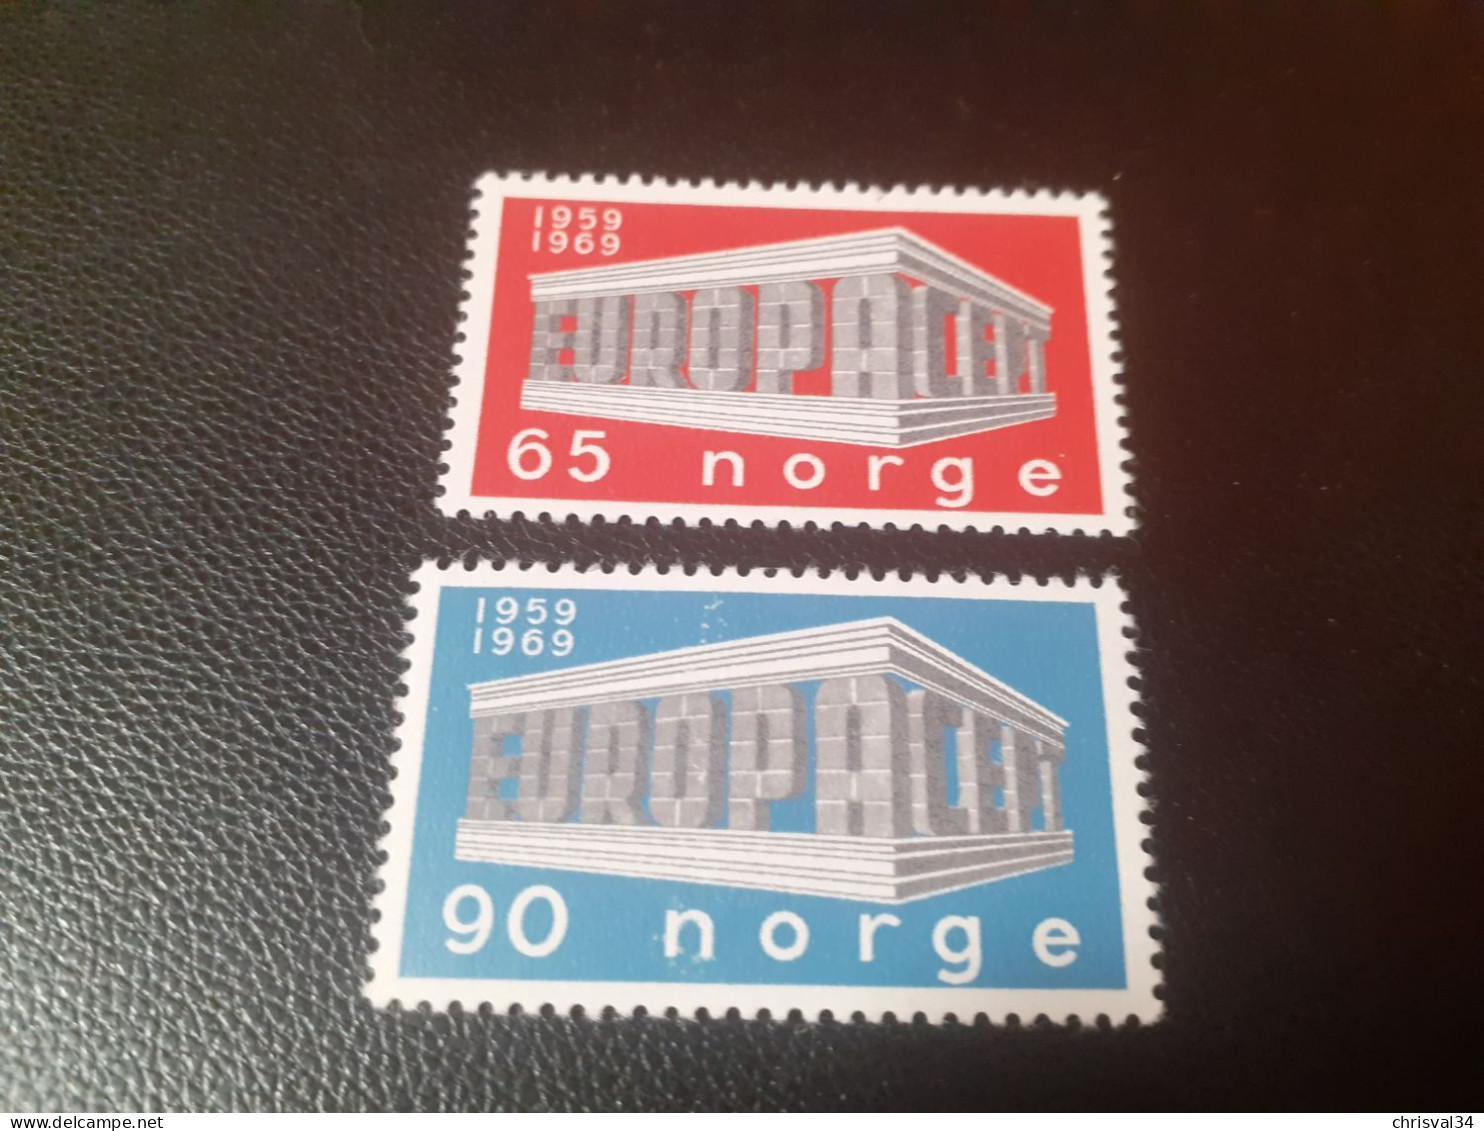 TIMBRES   NORVEGE  ANNEE 1969   N  538 / 539   COTE  3,00  EUROS   NEUFS  LUXE** - Nuevos